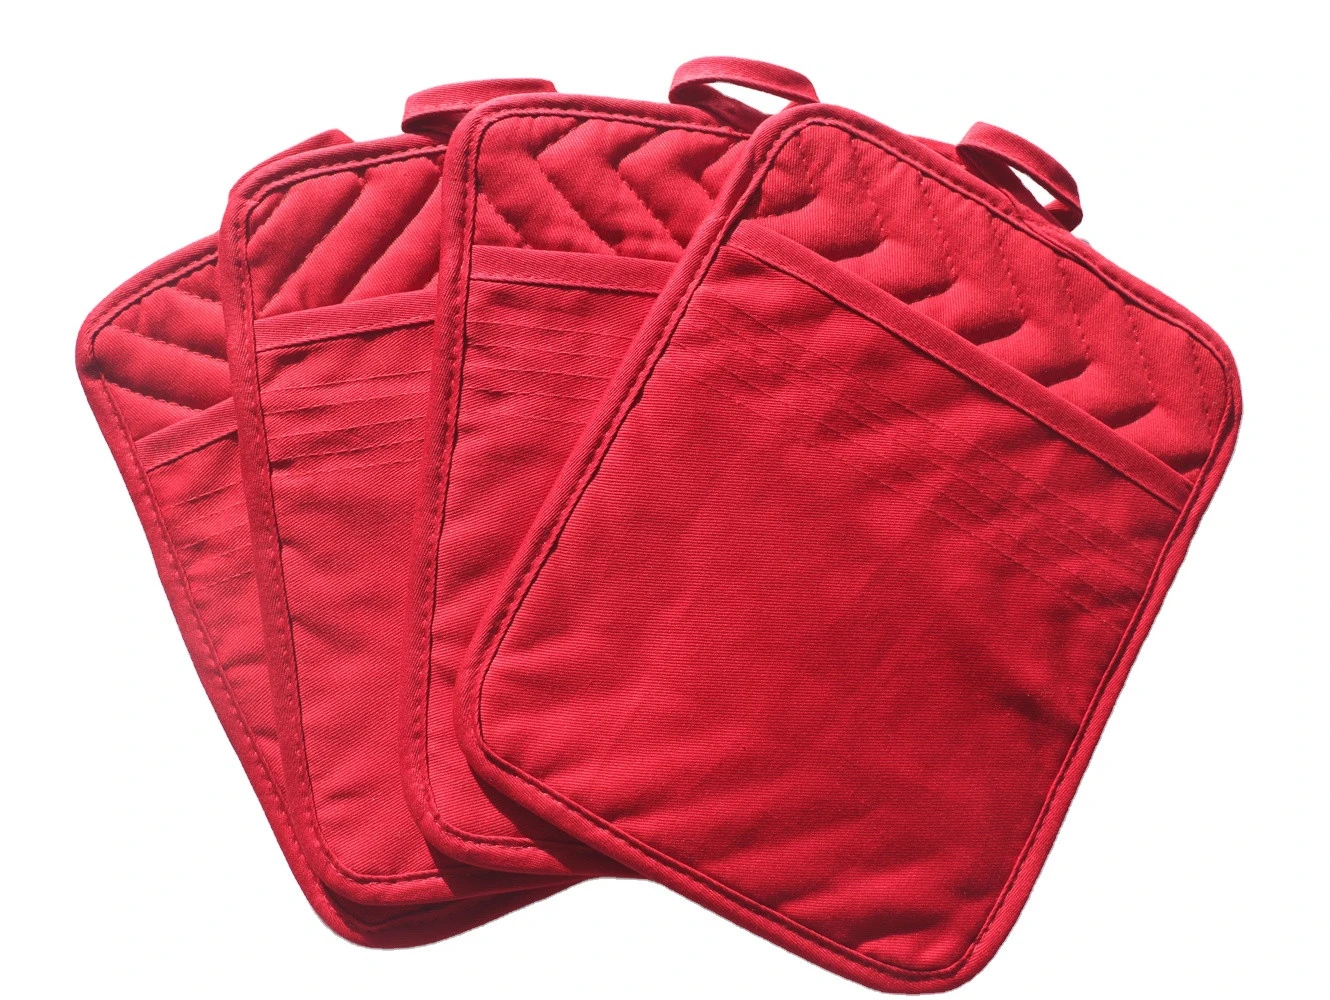 Ready to Ship Classic Red Black Grey Hot Pad 100% Cotton Heat Resistant Christmas Oven Pot Holder with Pocket